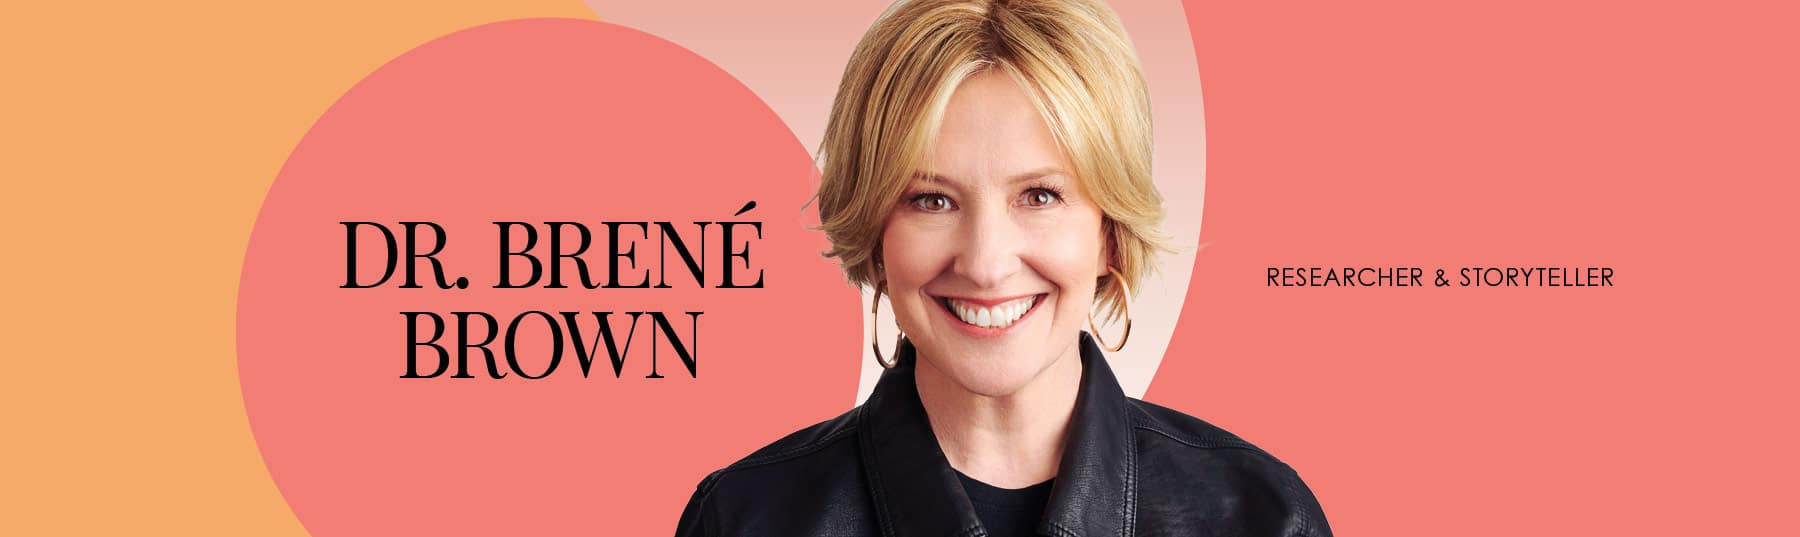 Join Brené Brown at the California Conference for Women this February 29th!